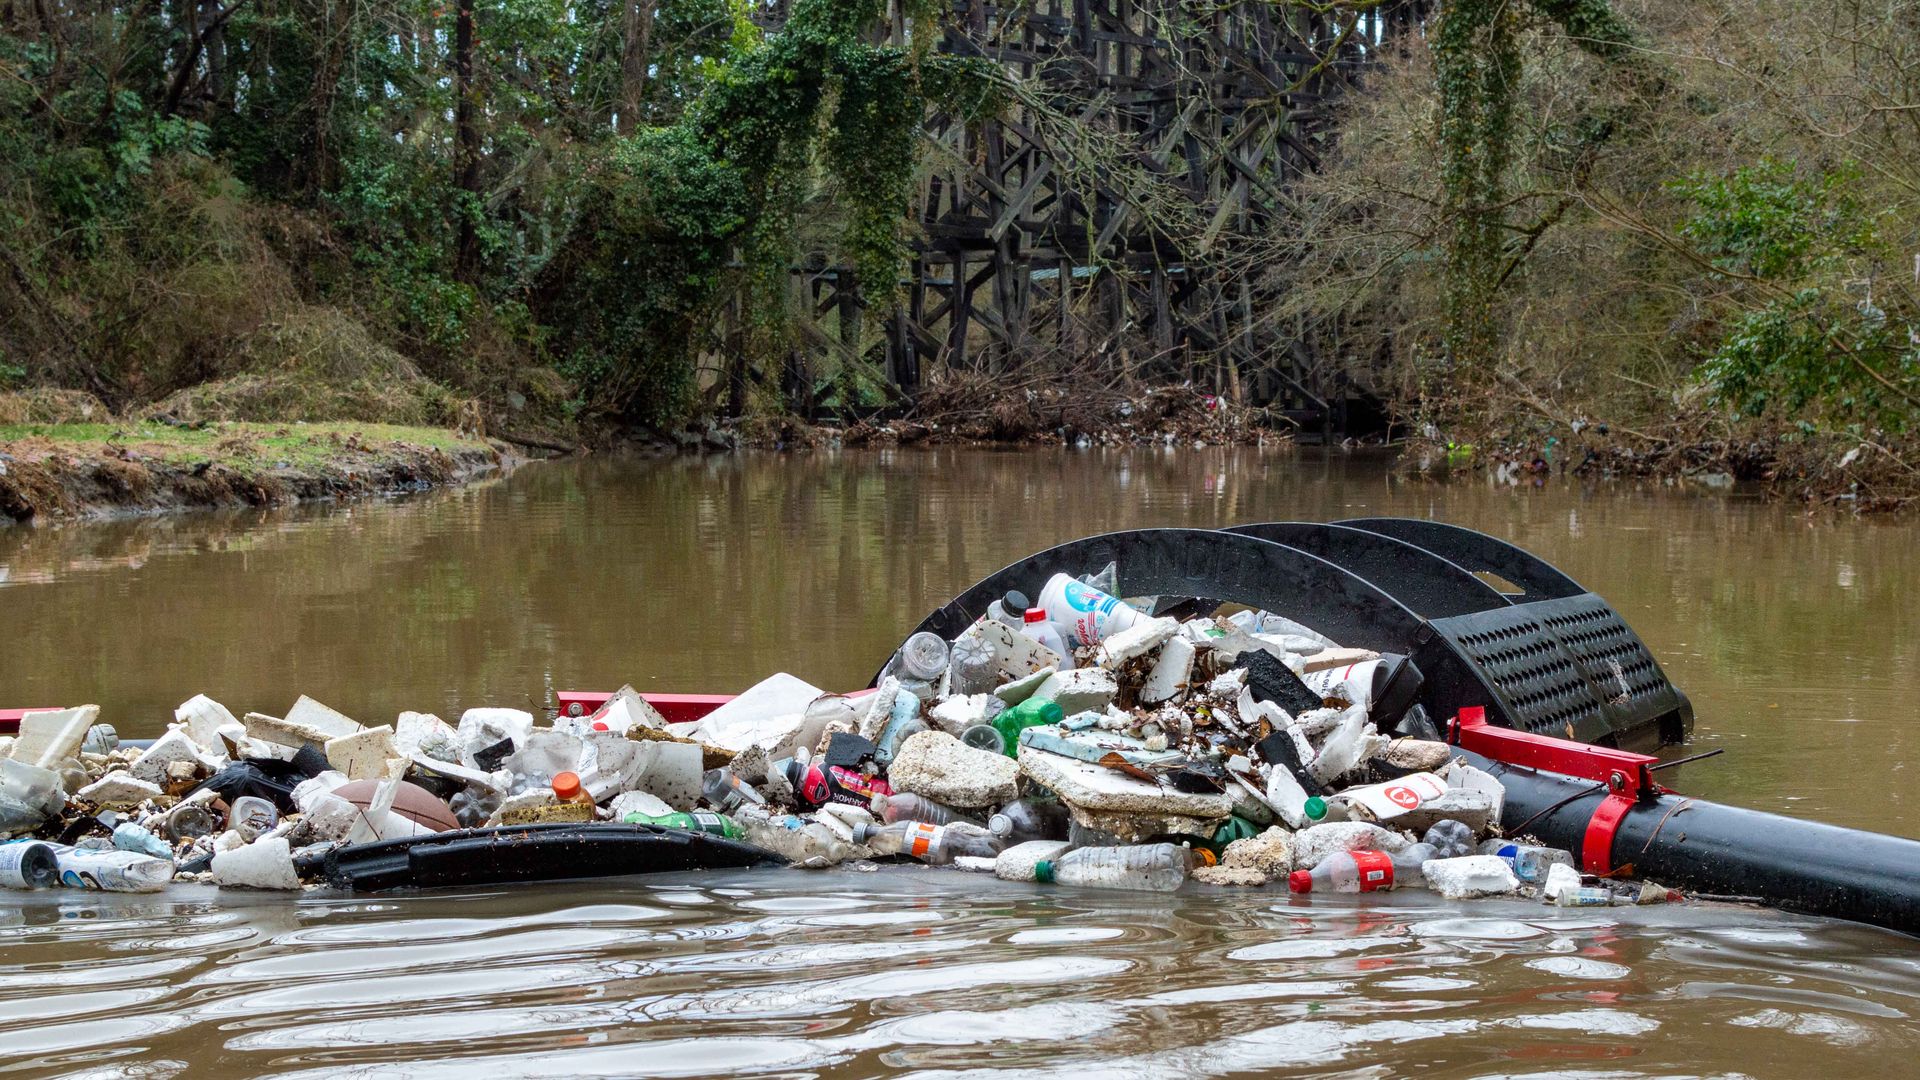 A photo of a creek with a device that filters bottles and other floating trash  